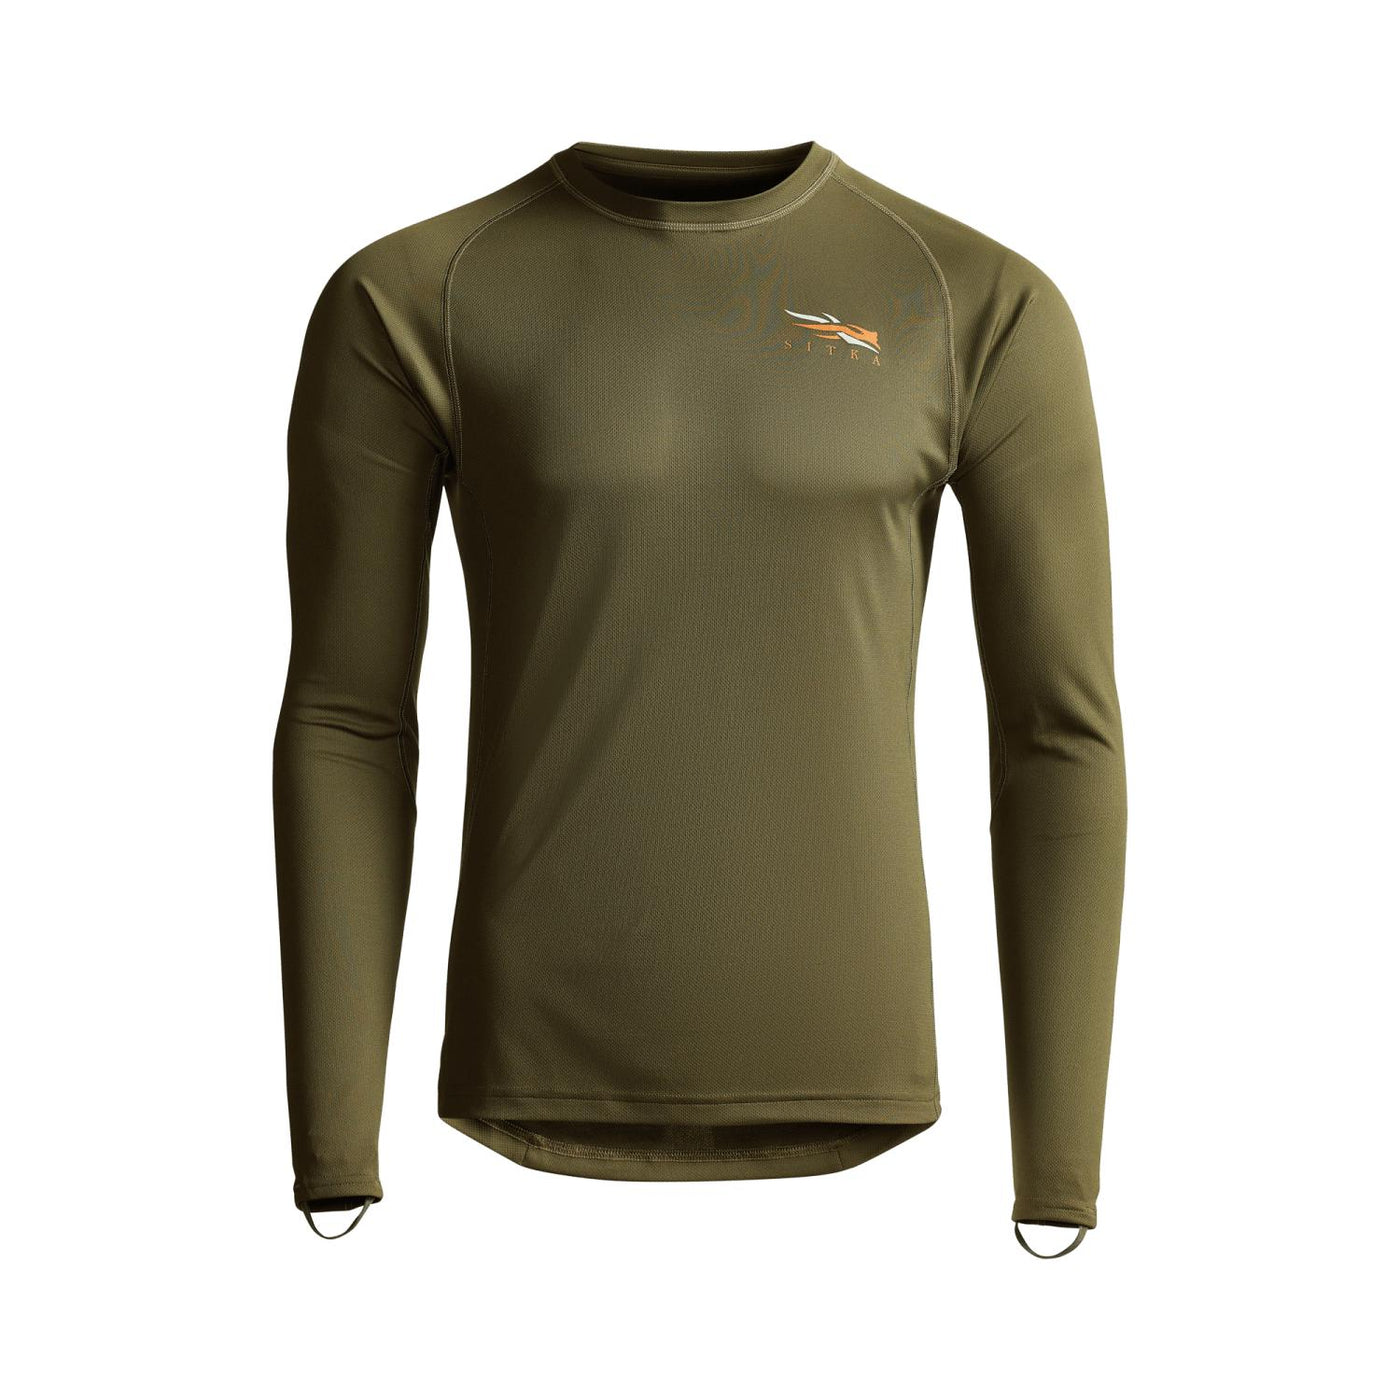 Sitka Core Lightweight Long Sleeve Crew-Men's Clothing-Pyrite-M-Kevin's Fine Outdoor Gear & Apparel